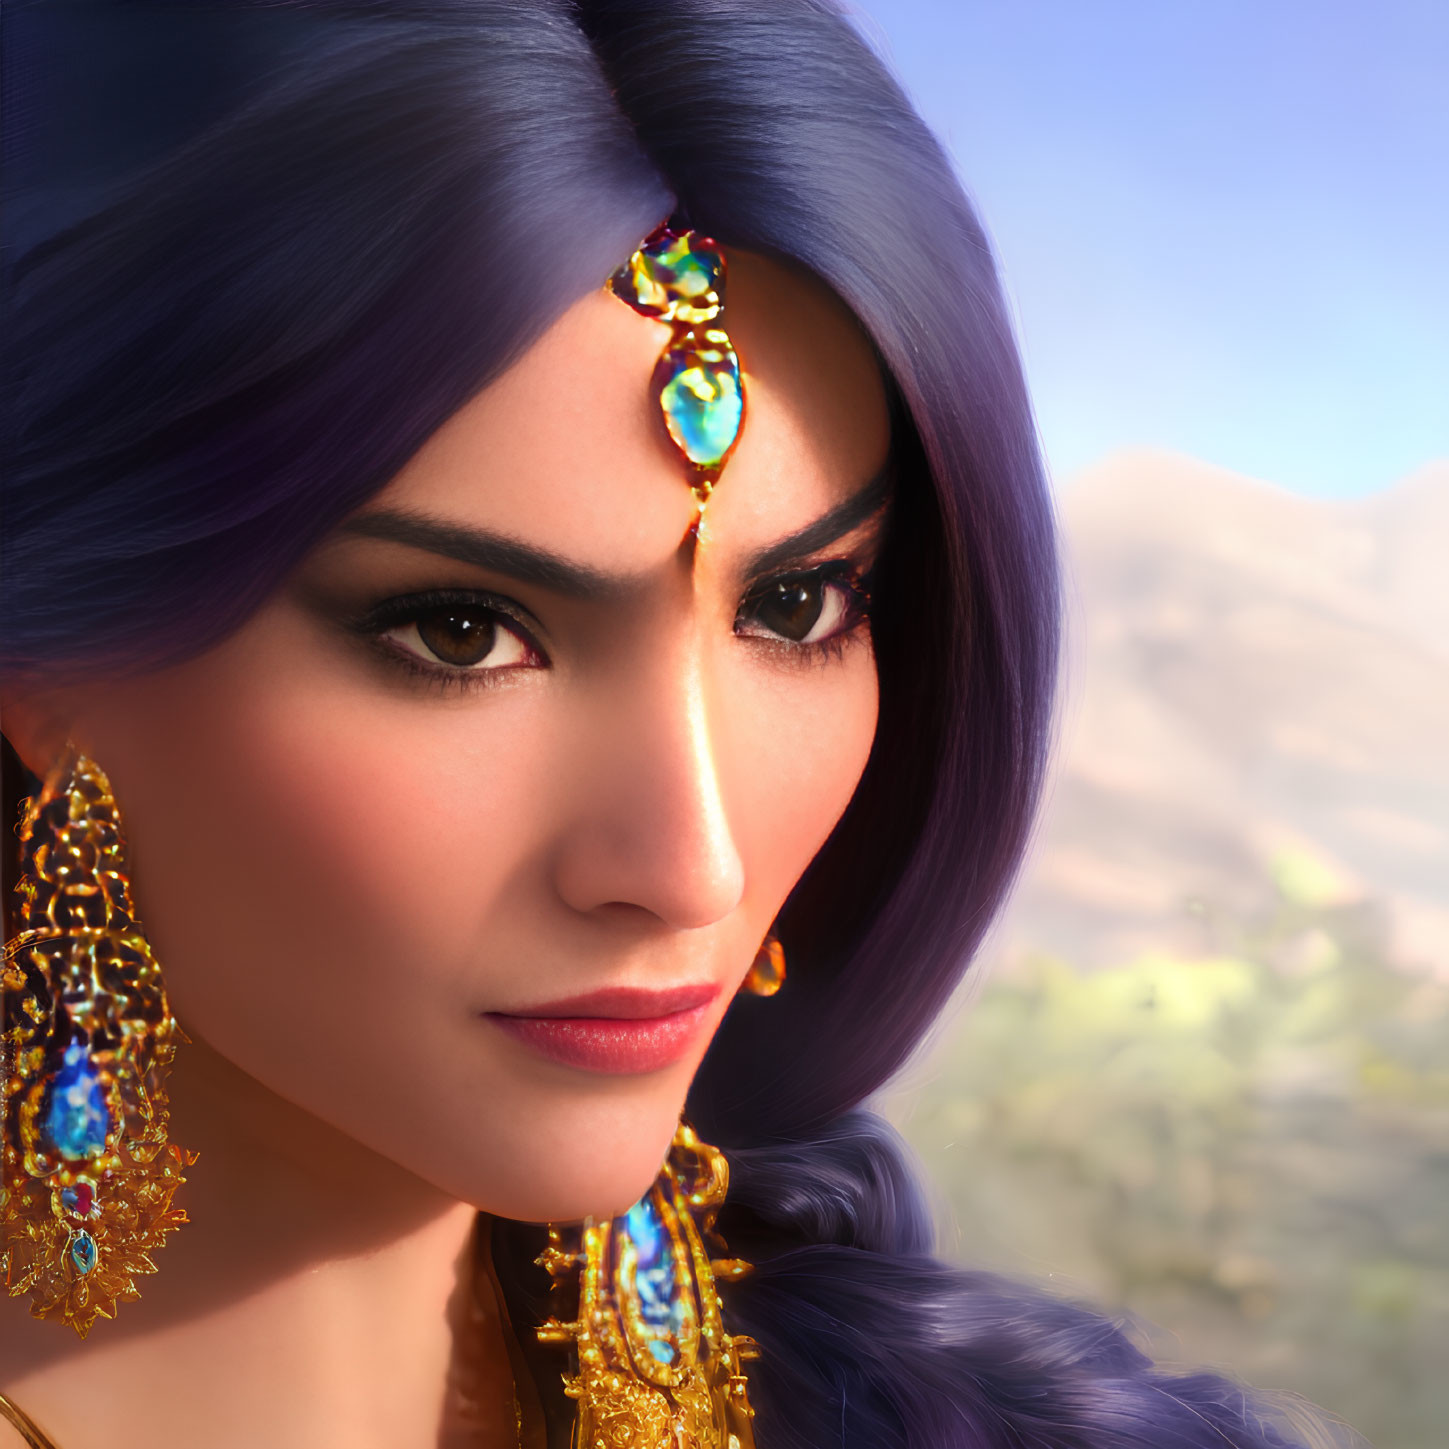 Woman with Purple Hair and Golden Jewelry in Mountainous Setting